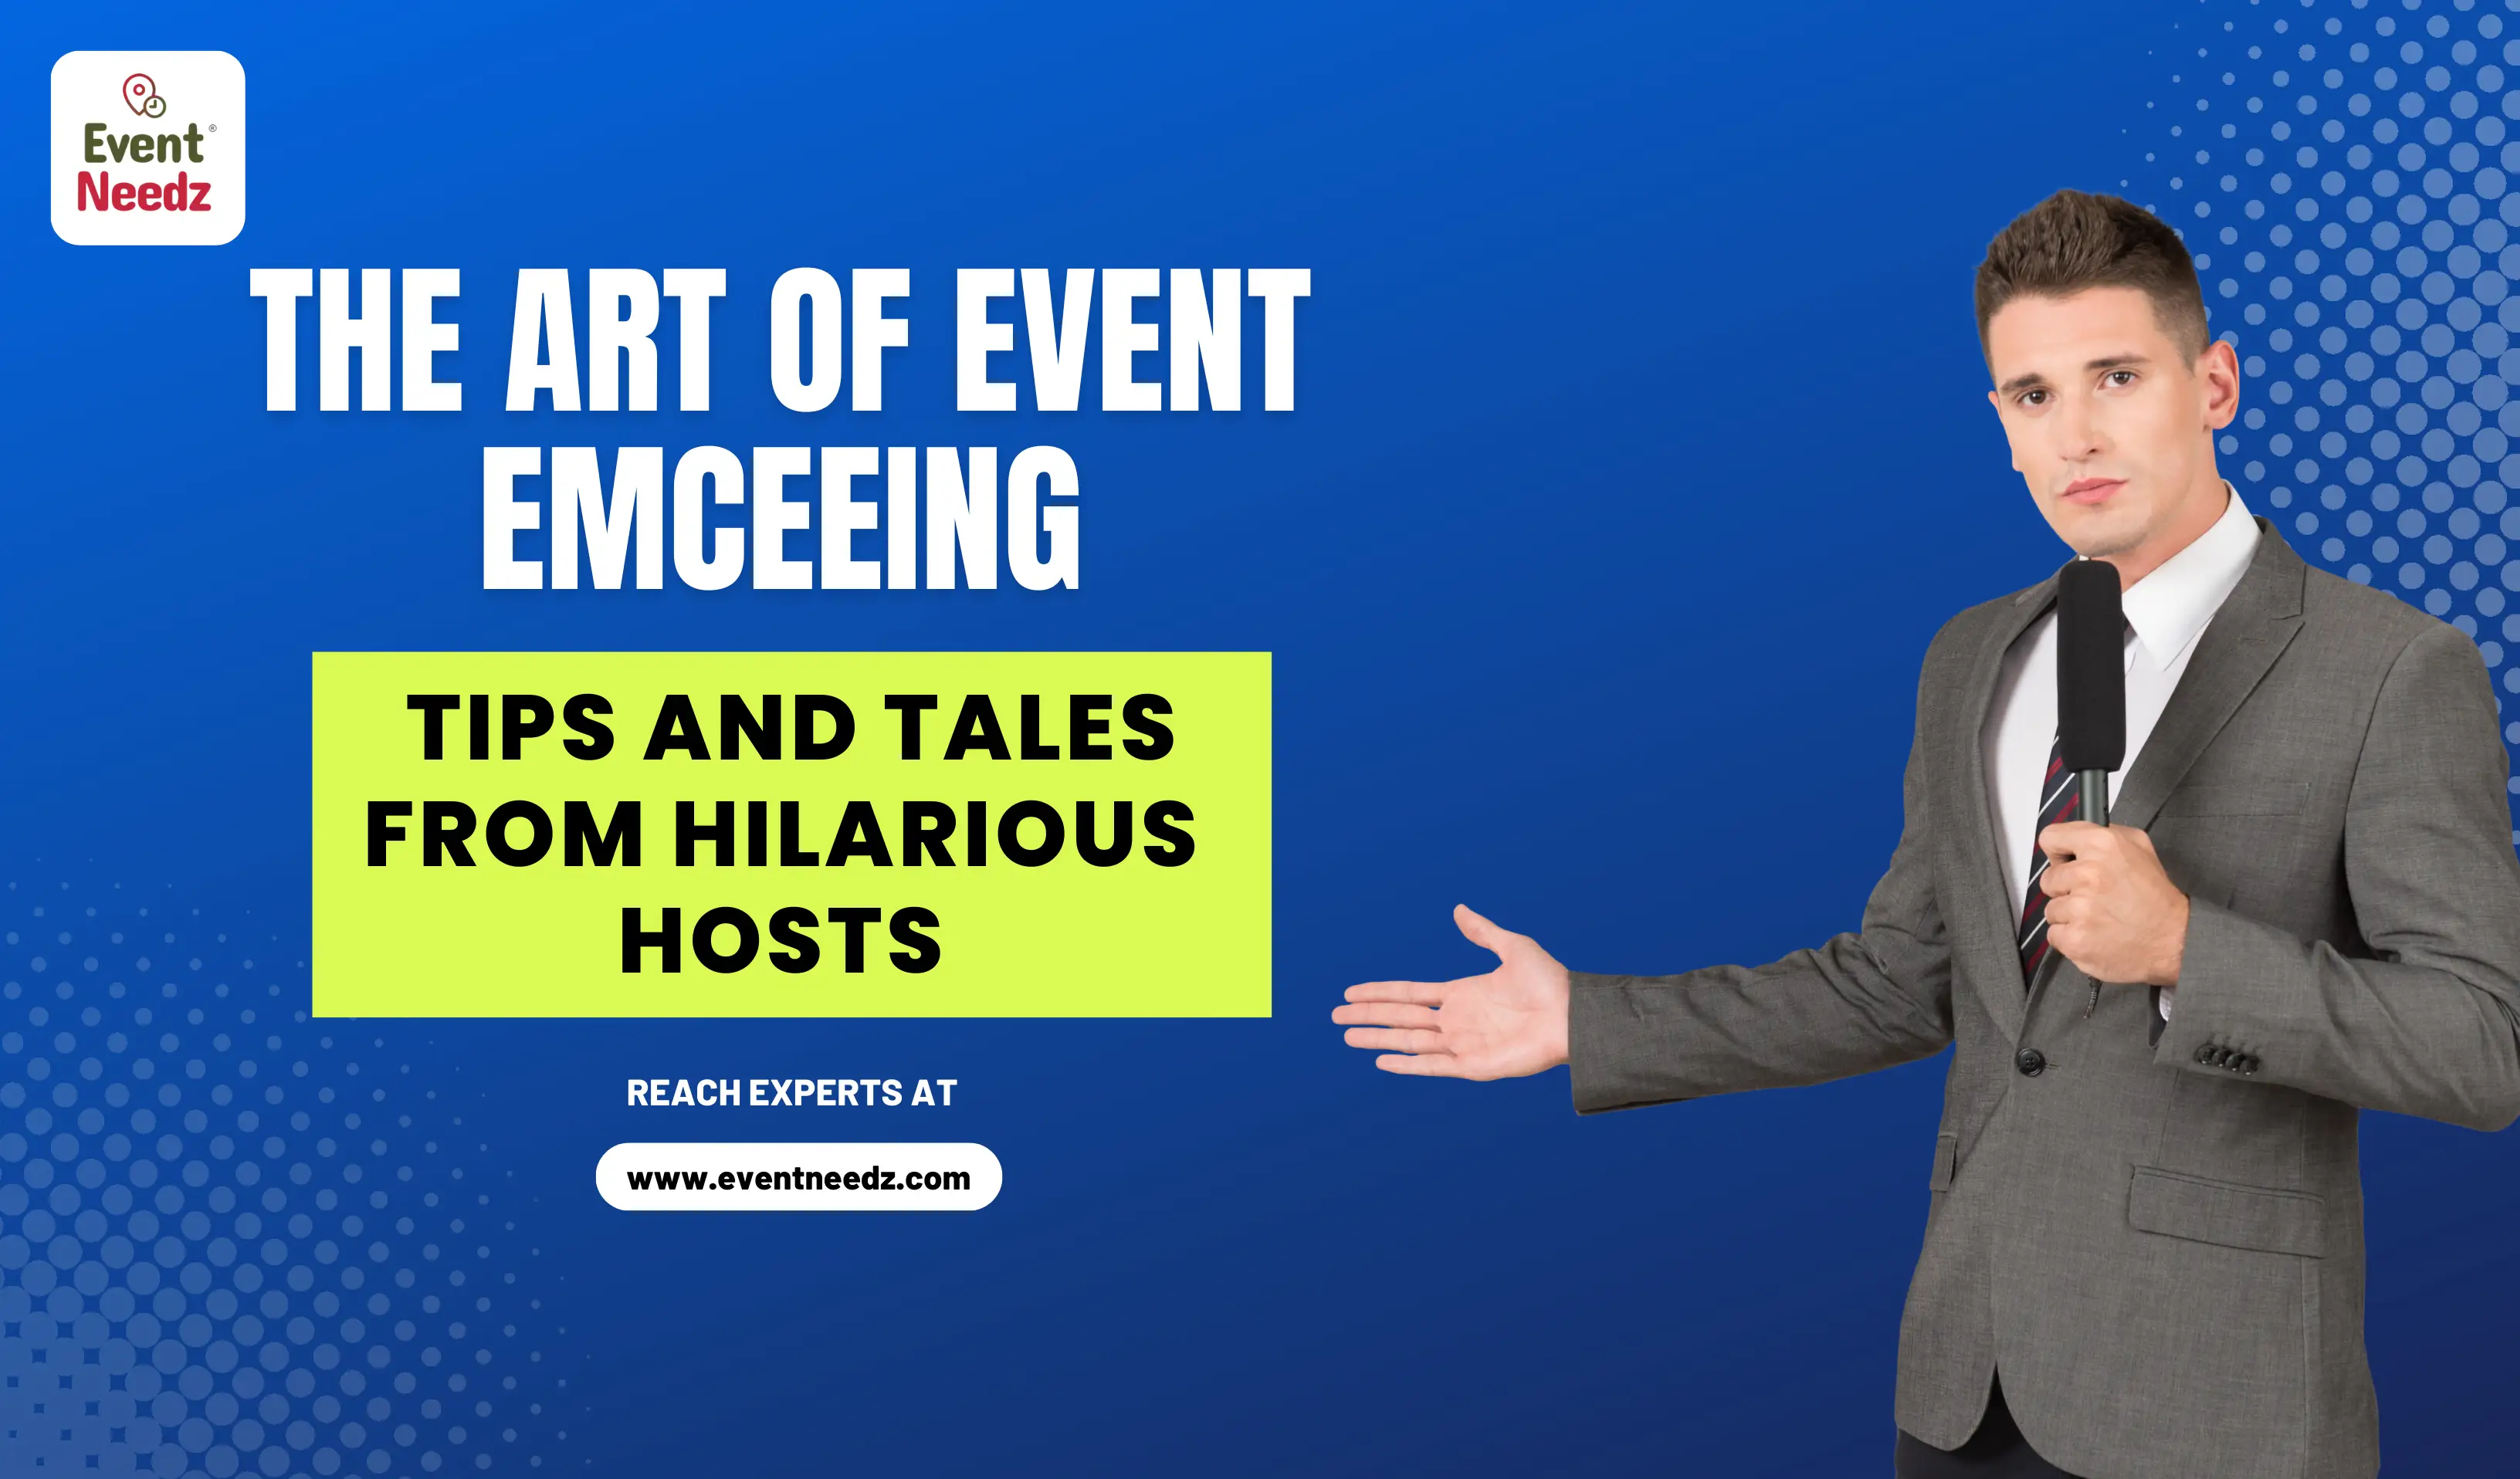 The Art of Event Emceeing Tips and Tales from Hilarious Hosts